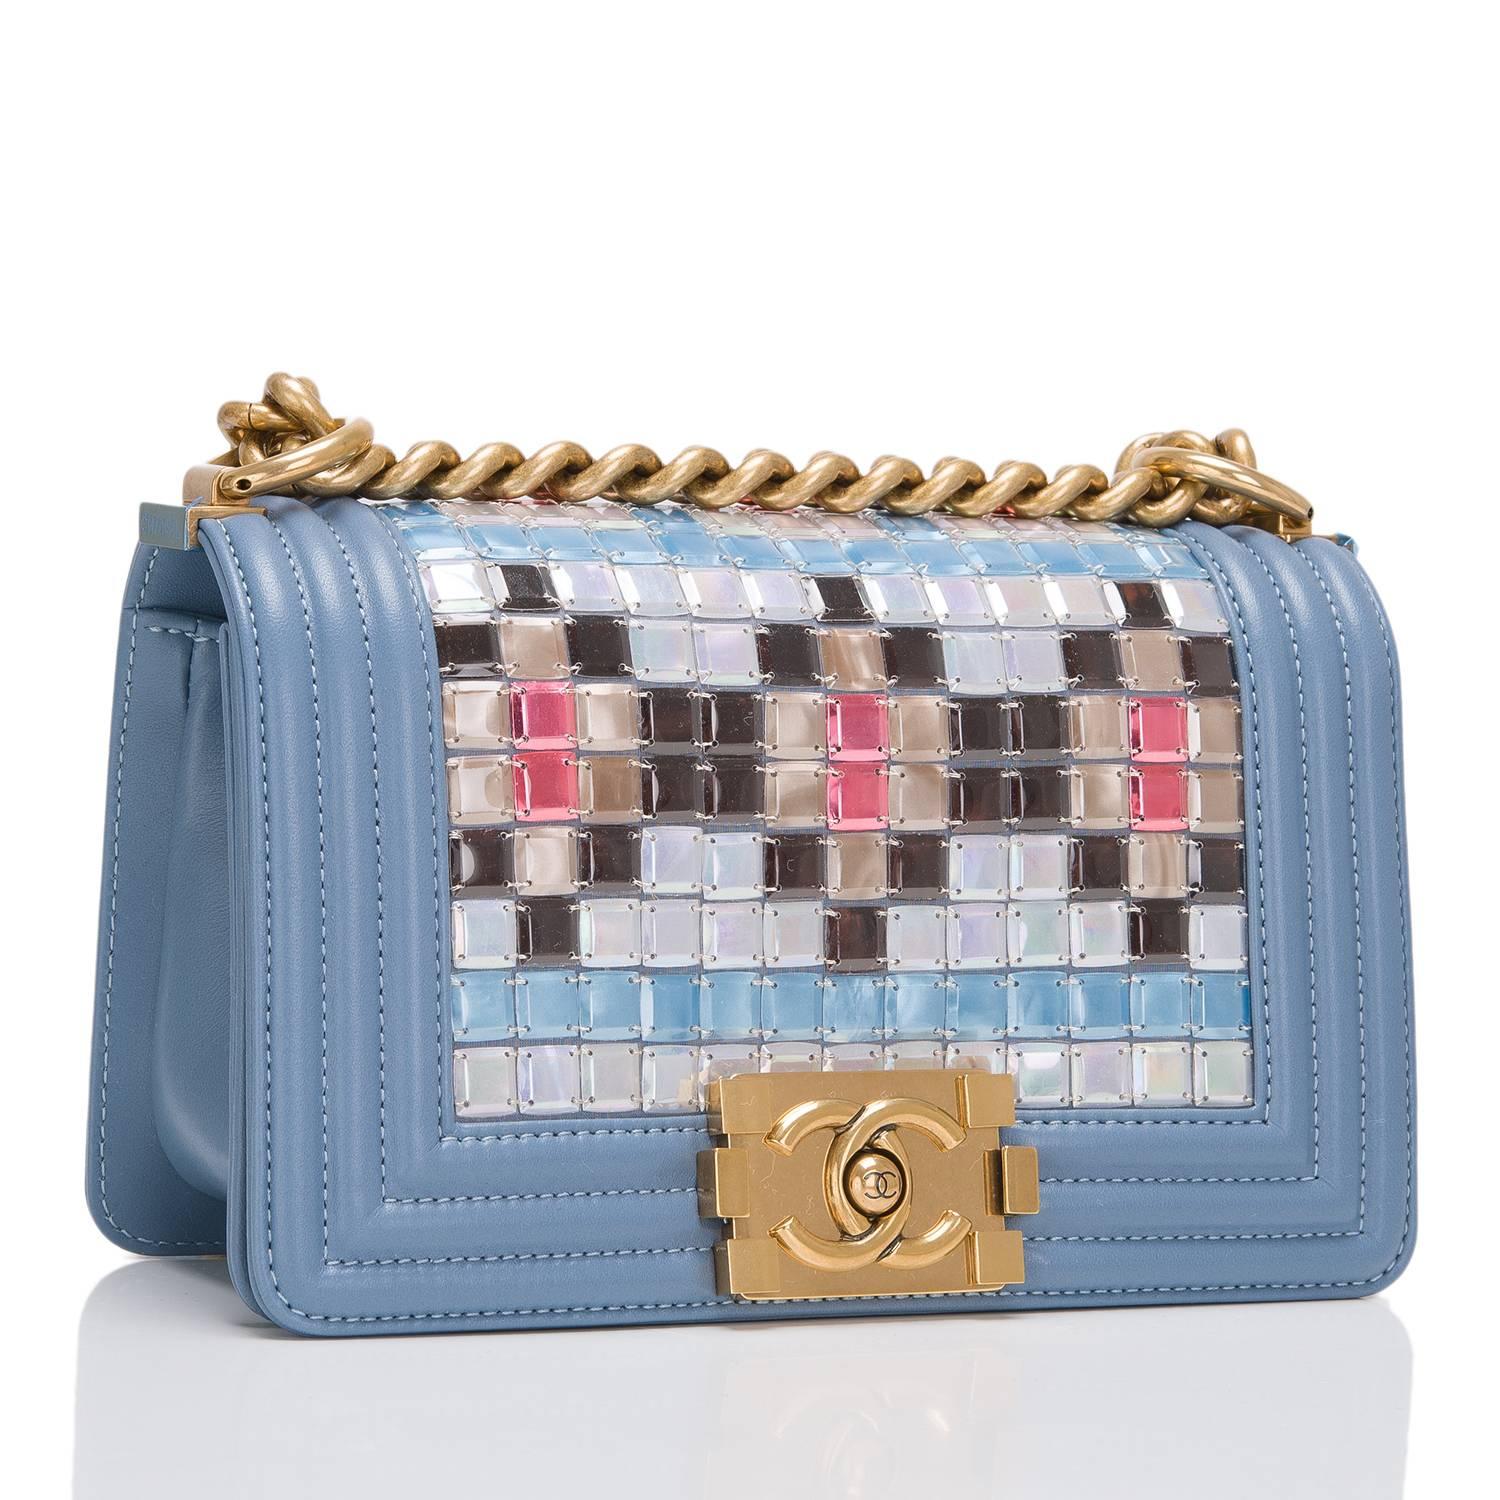 Chanel limited edition Small Boy bag of light blue lambskin leather with antique gold tone hardware.

This bag features a front flap with the Boy signature CC push lock closure, multicolor mosaic embroideries by Lesage, and an antique gold tone